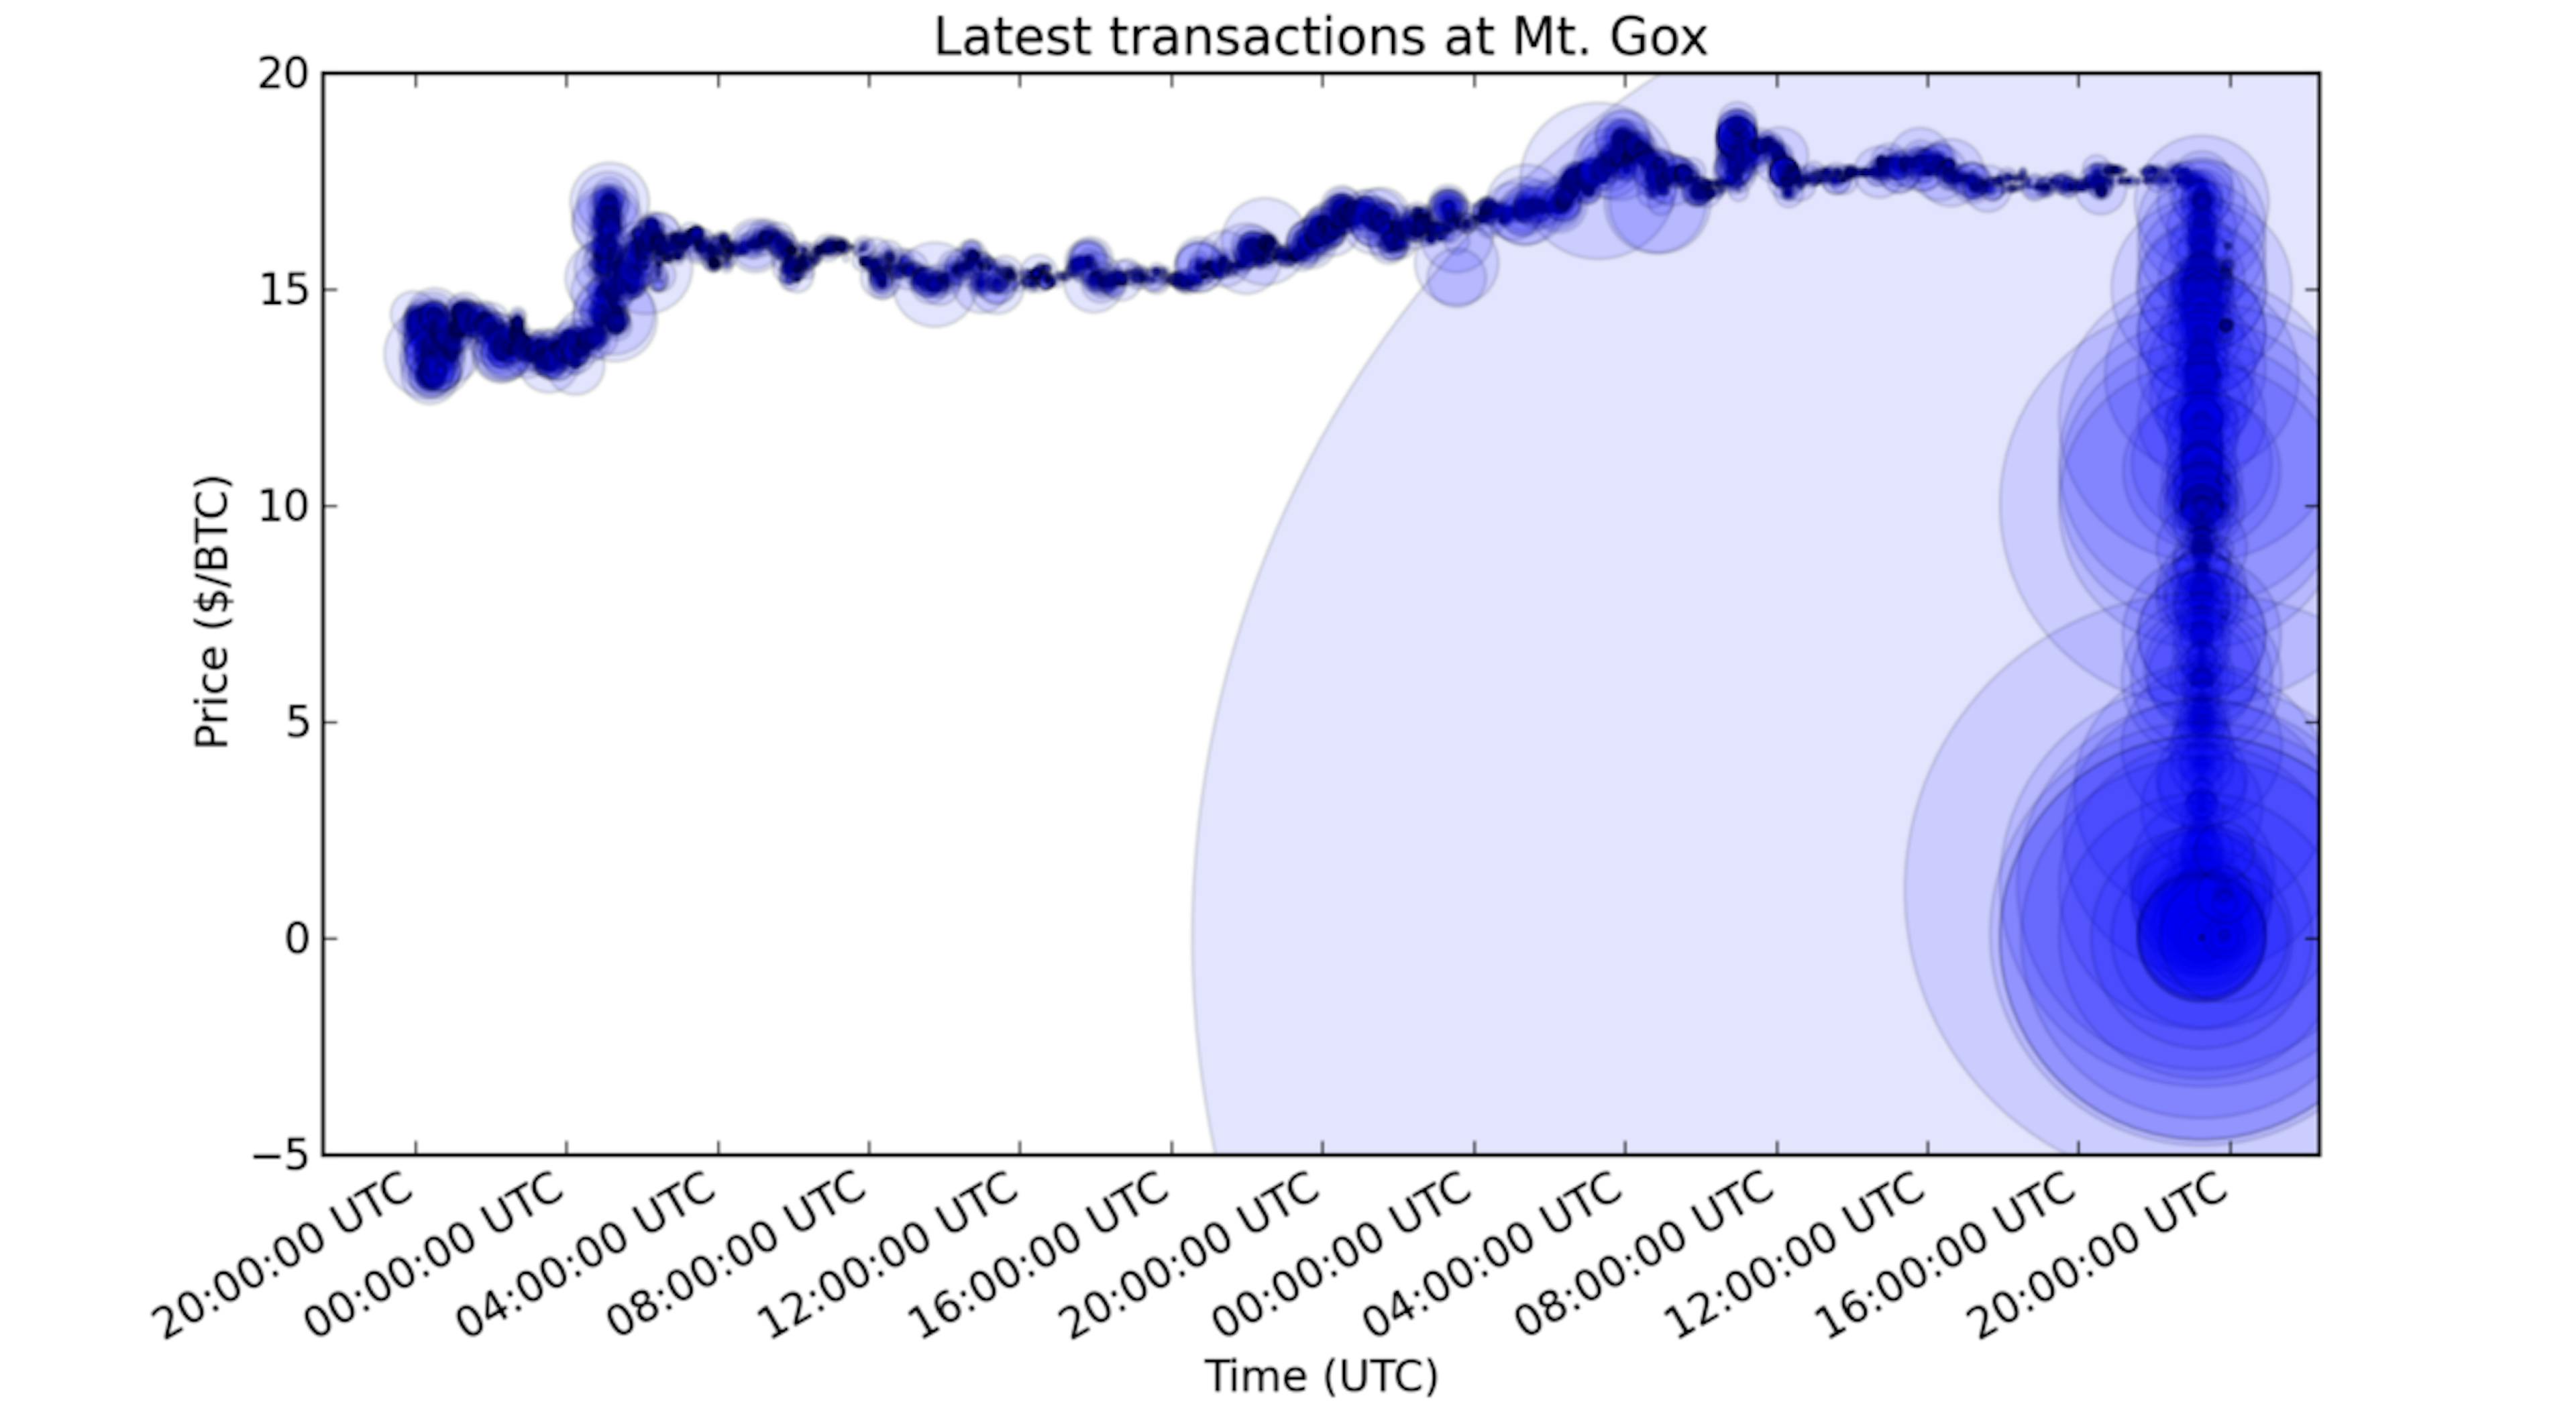 Mt Gox loses all its customers’ money